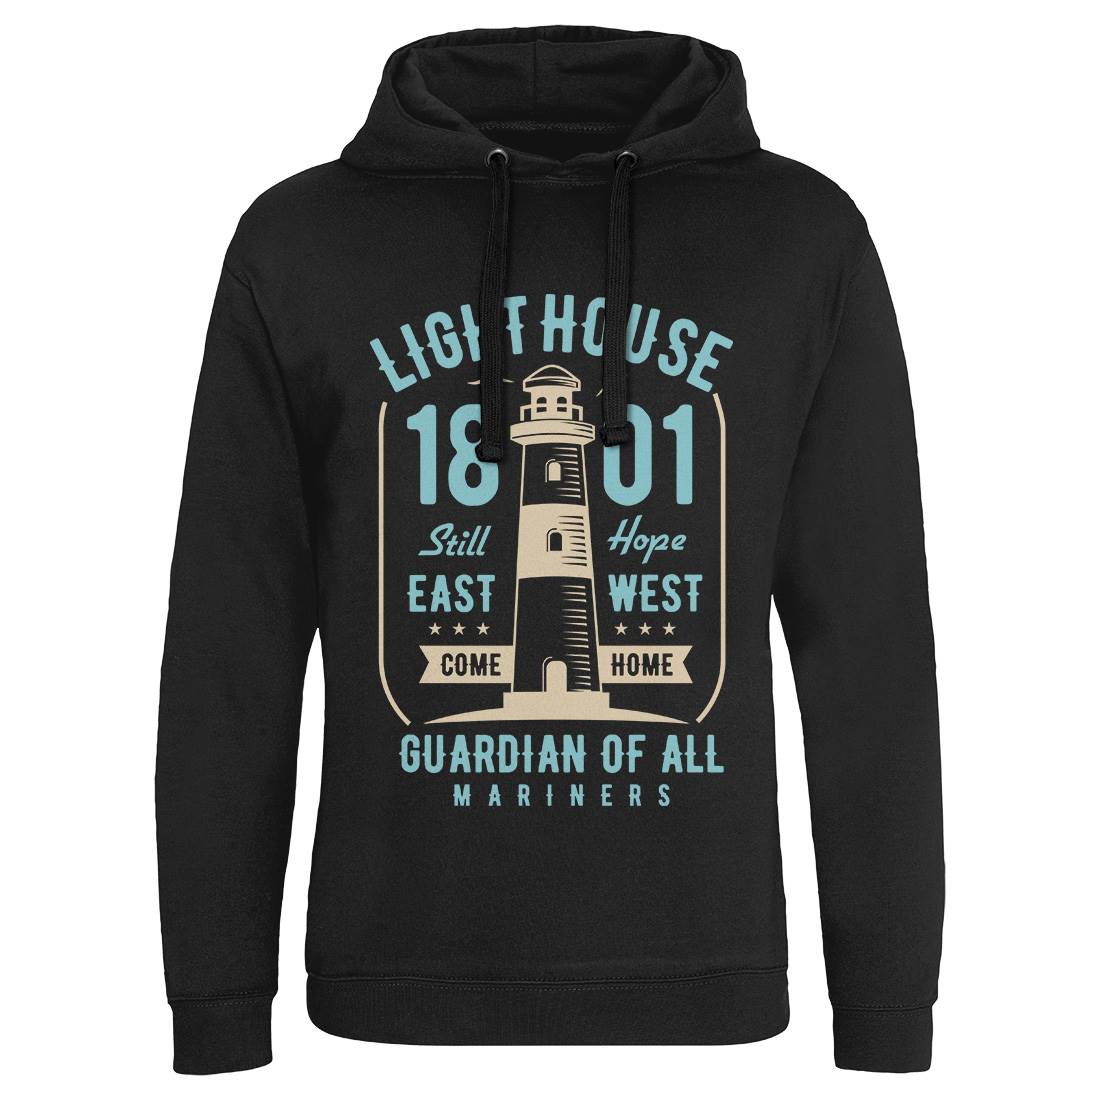 Light House Mens Hoodie Without Pocket Navy B418